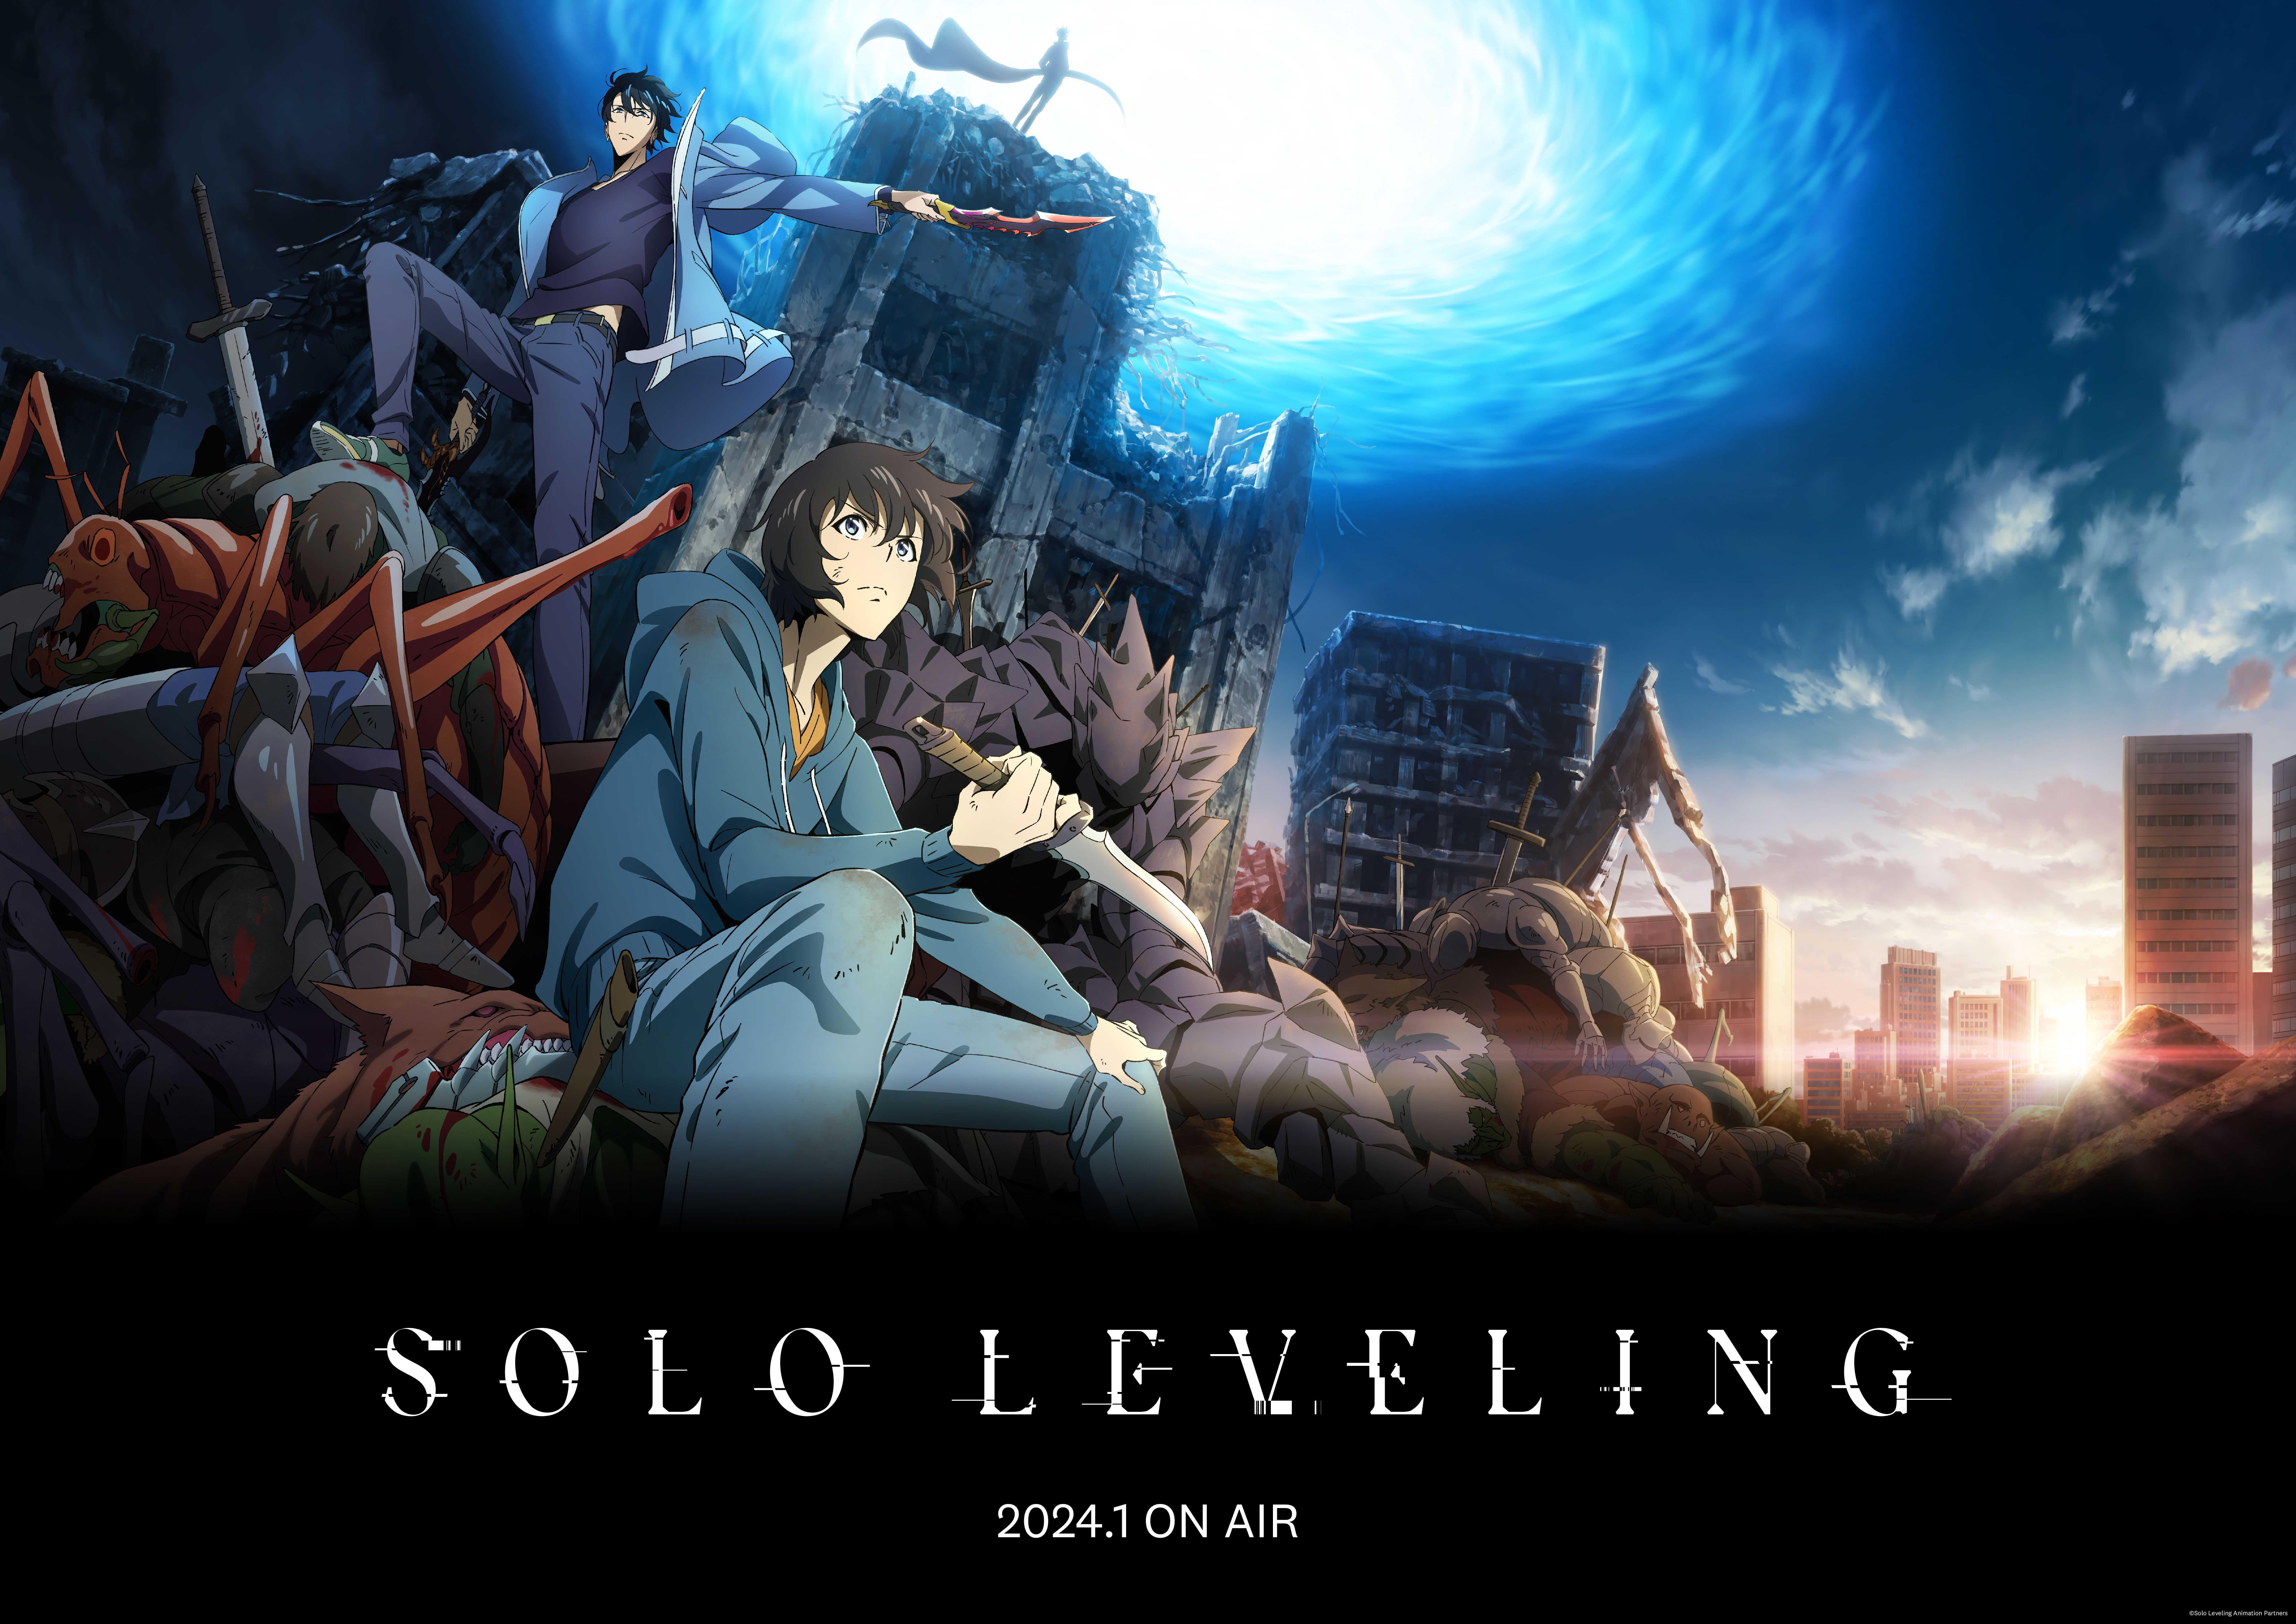 Crunchyroll And Aniplex Unveil Anime Adaptation: Solo Leveling